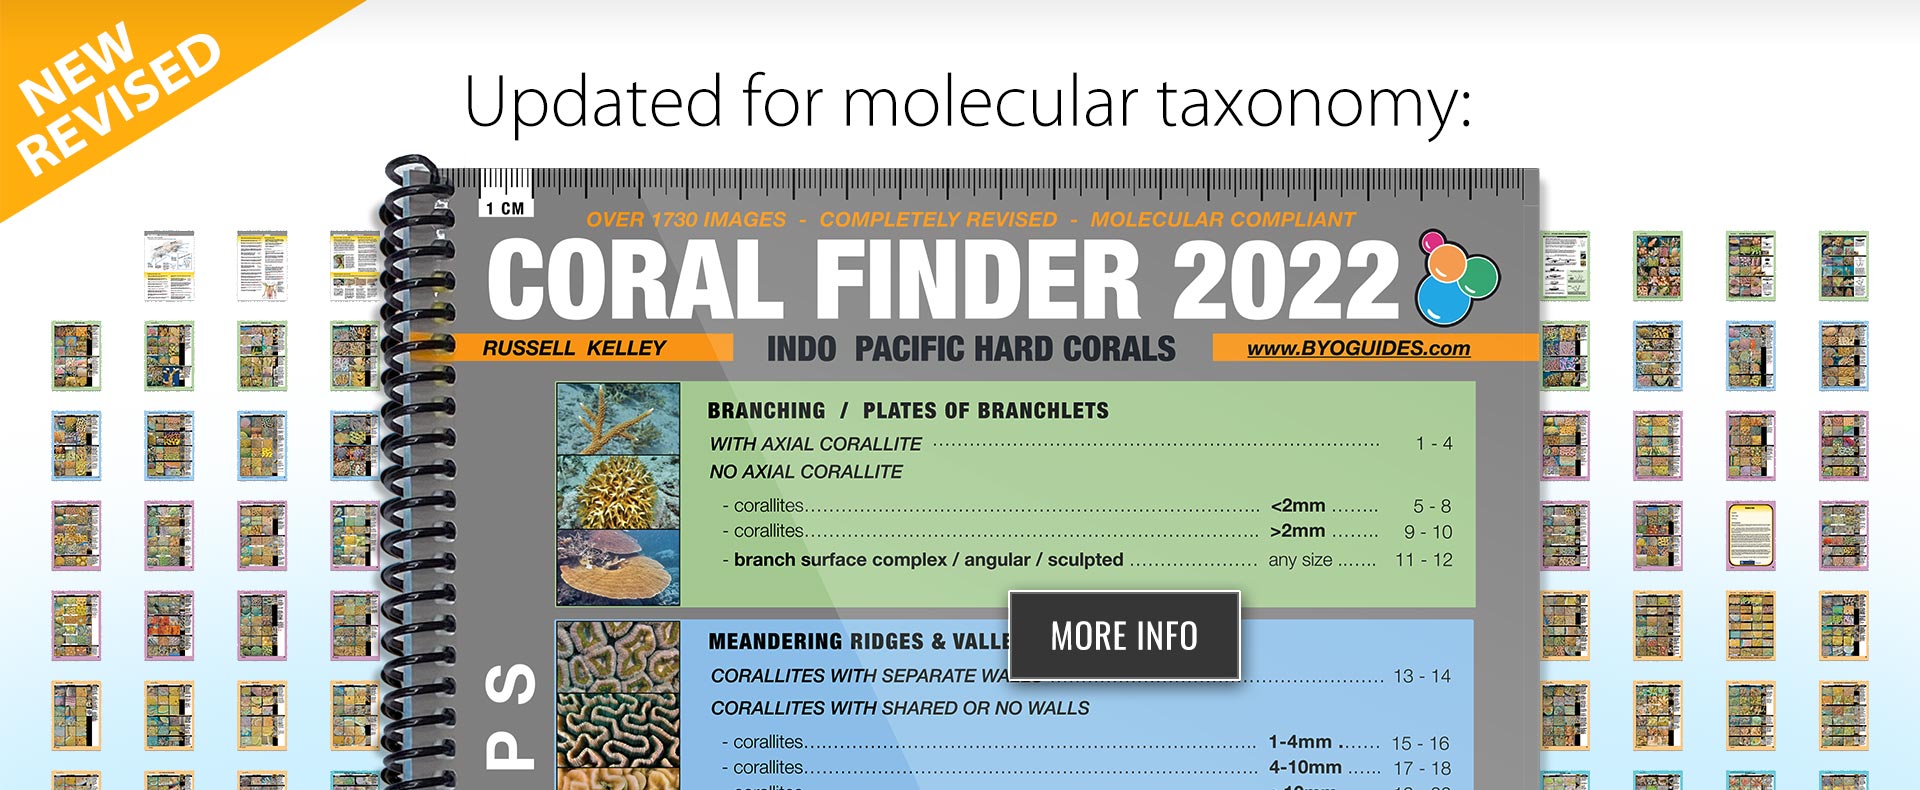 Coral Finder 2022 - updated for molecular taxonomy